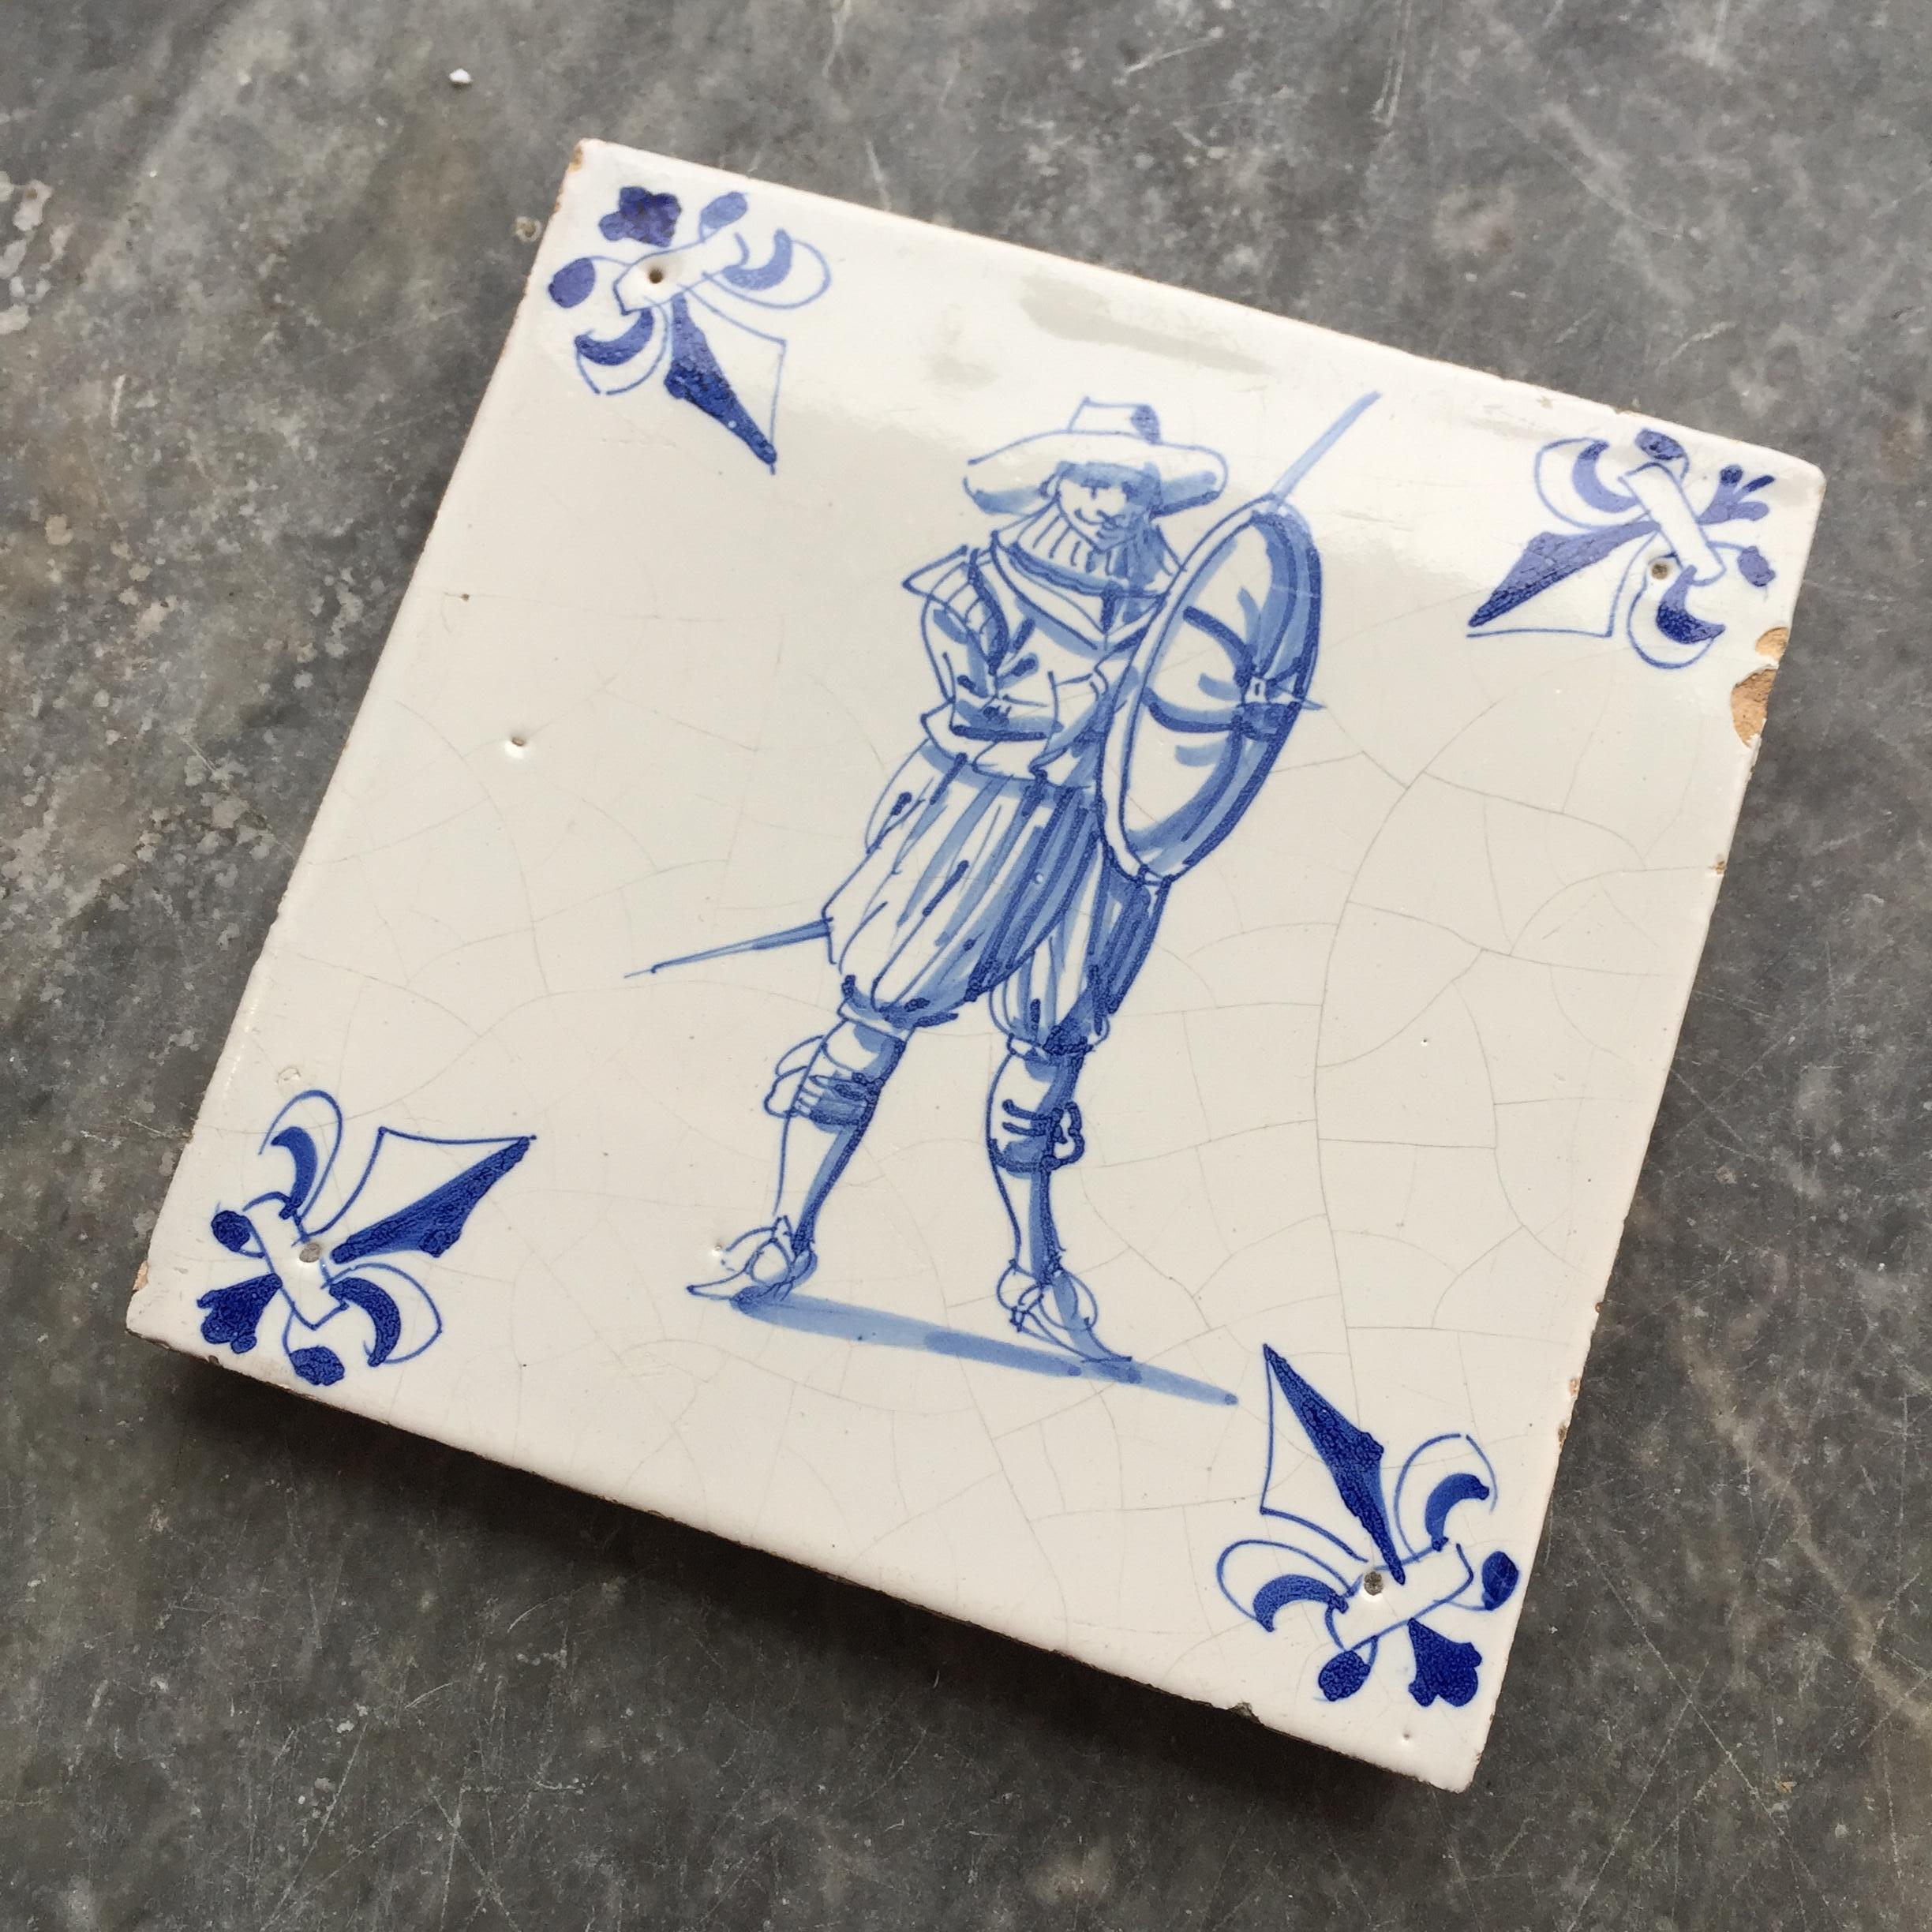 Baroque Blue and White Dutch Delft Tile with Swordsman, Mid 17th Century